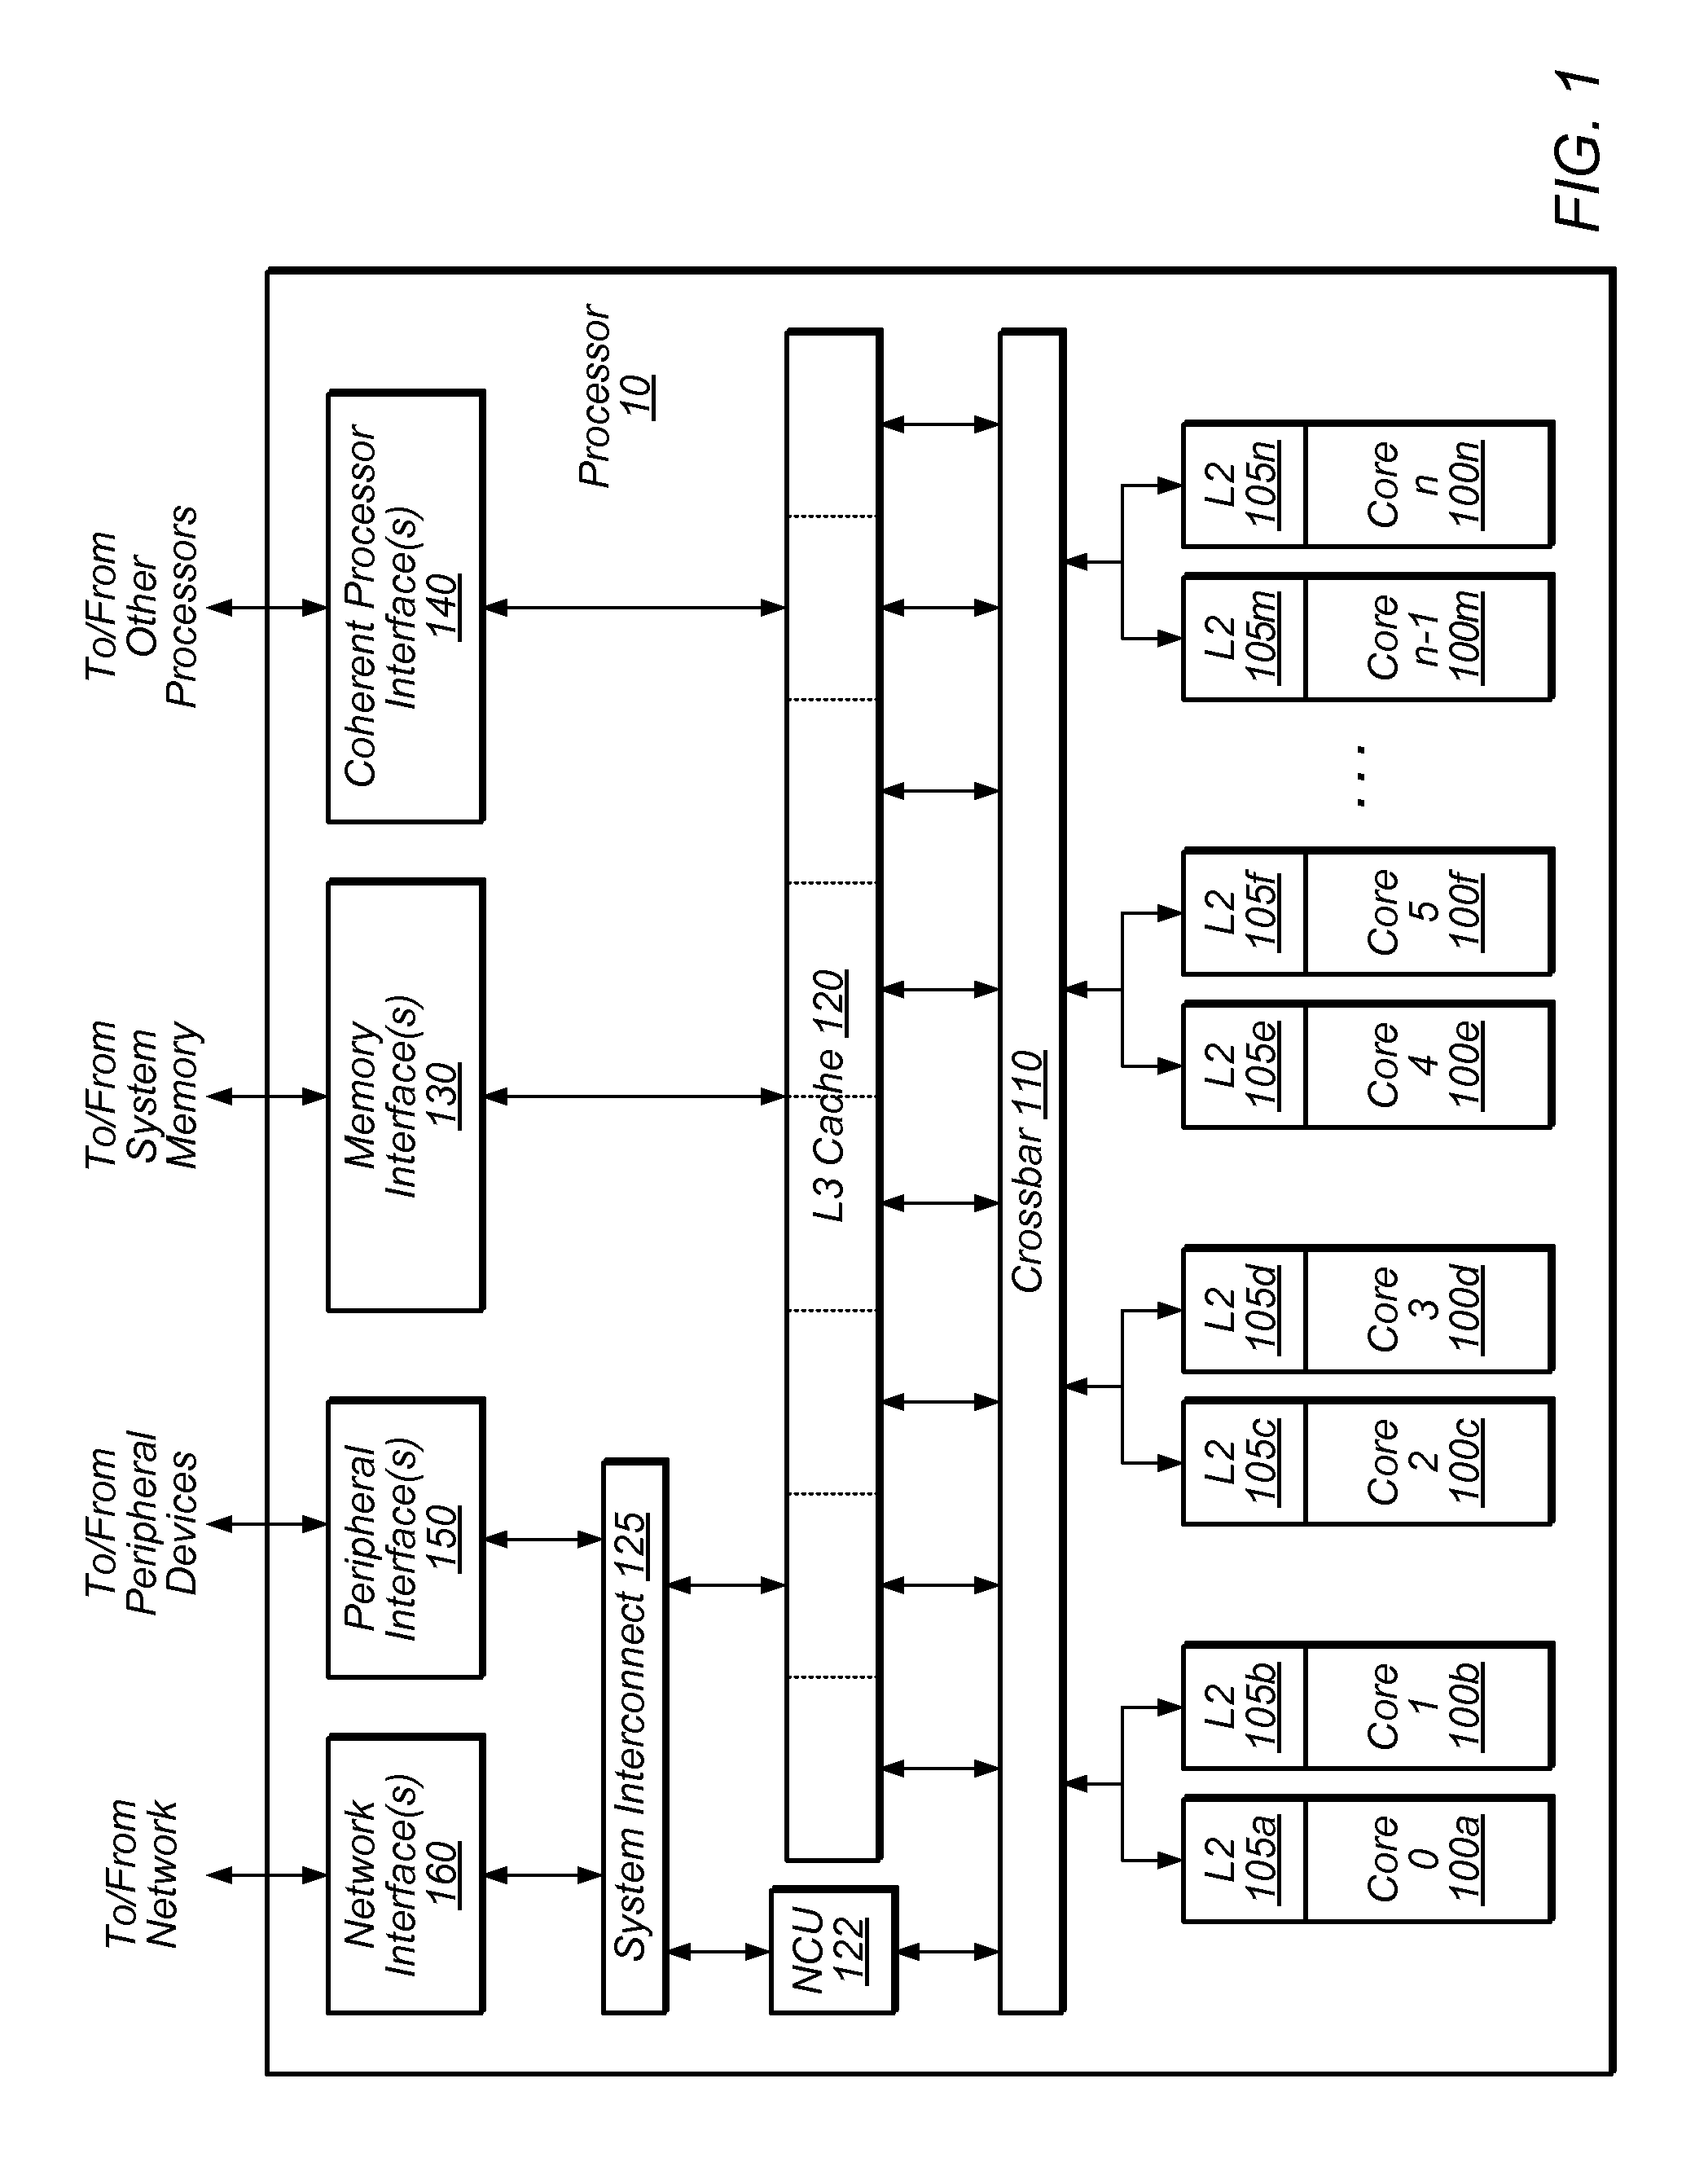 Low-latency branch target cache